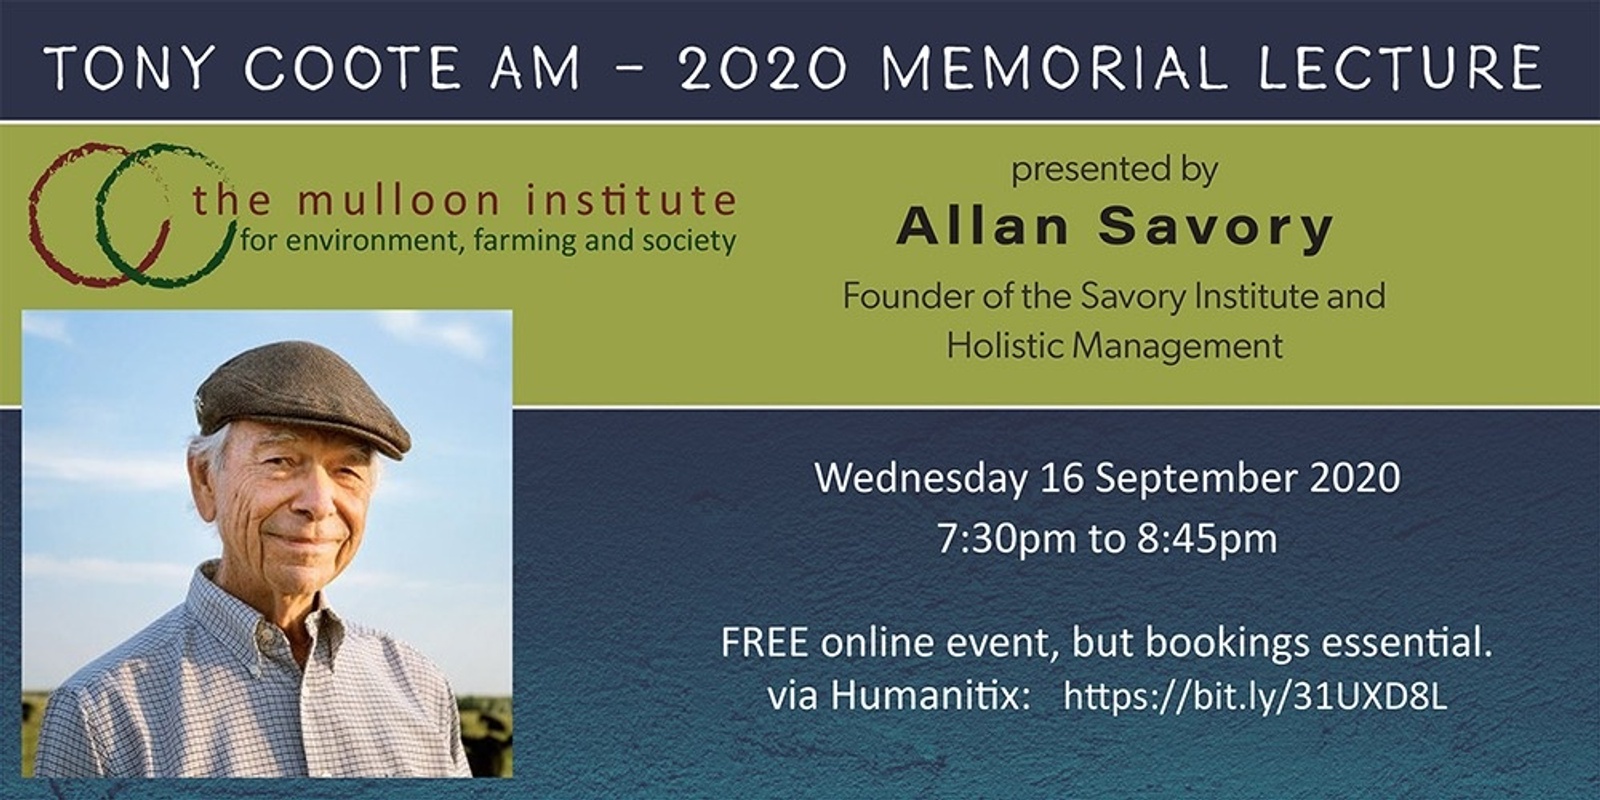 Banner image for Tony Coote AM Memorial Lecture with Allan Savory